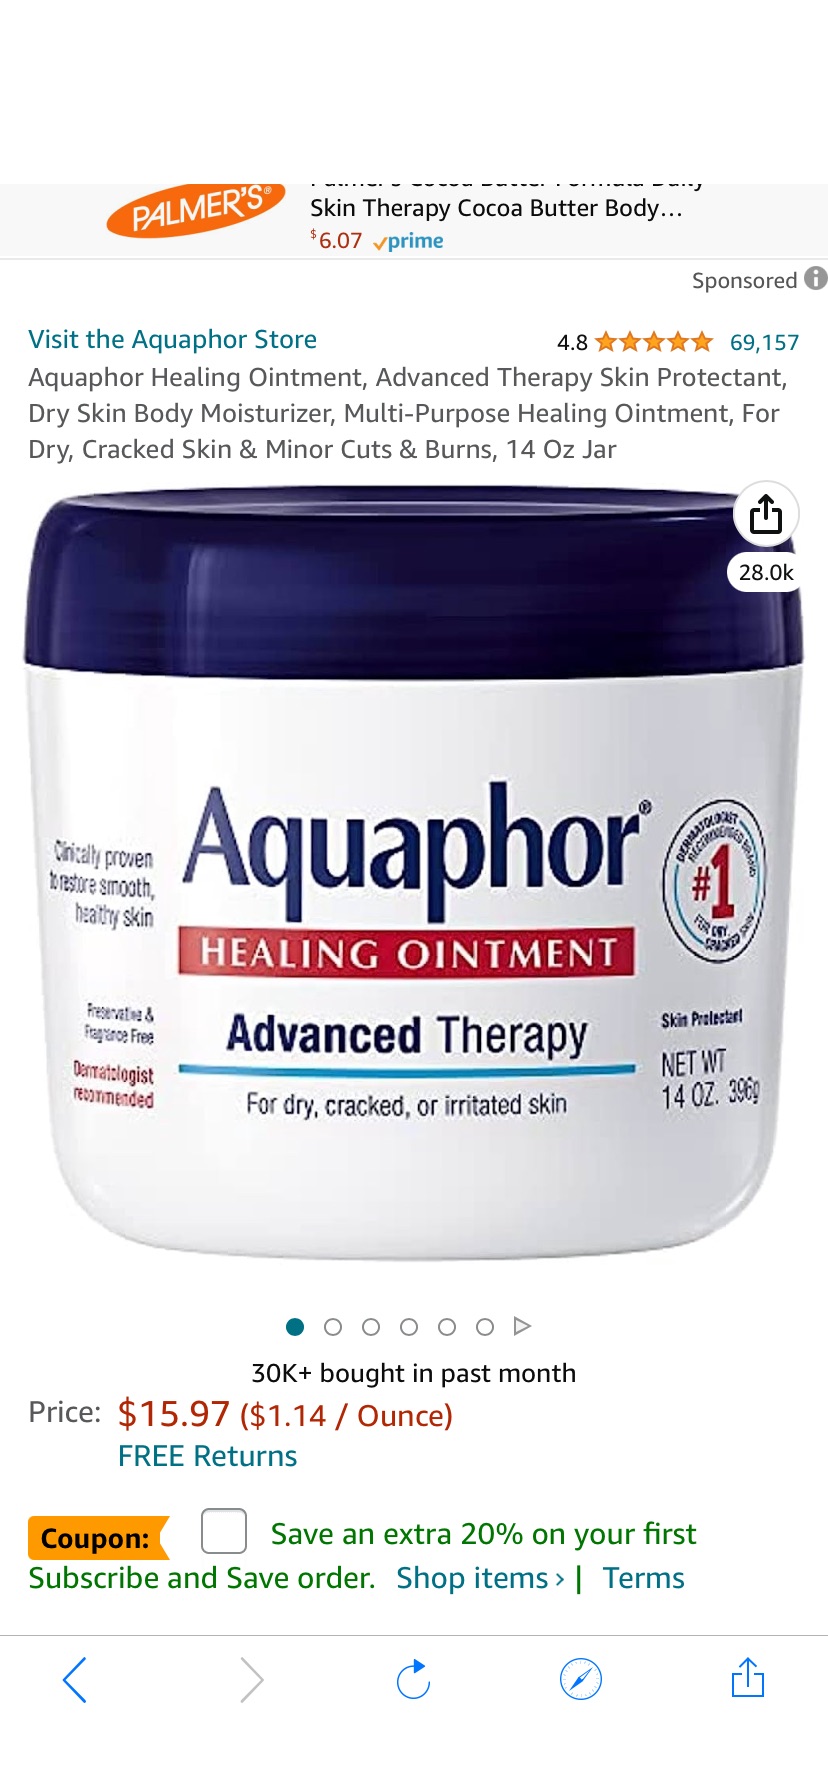 Amazon.com : Aquaphor舒缓霜 Healing Ointment, Advanced Therapy Skin Protectant, Dry Skin Body Moisturizer, Multi-Purpose Healing Ointment, For Dry, Cracked Skin & Minor Cuts & Burns, 14 Oz Jar : Aquaphor Healing Ointment Baby : Beauty & Personal Care